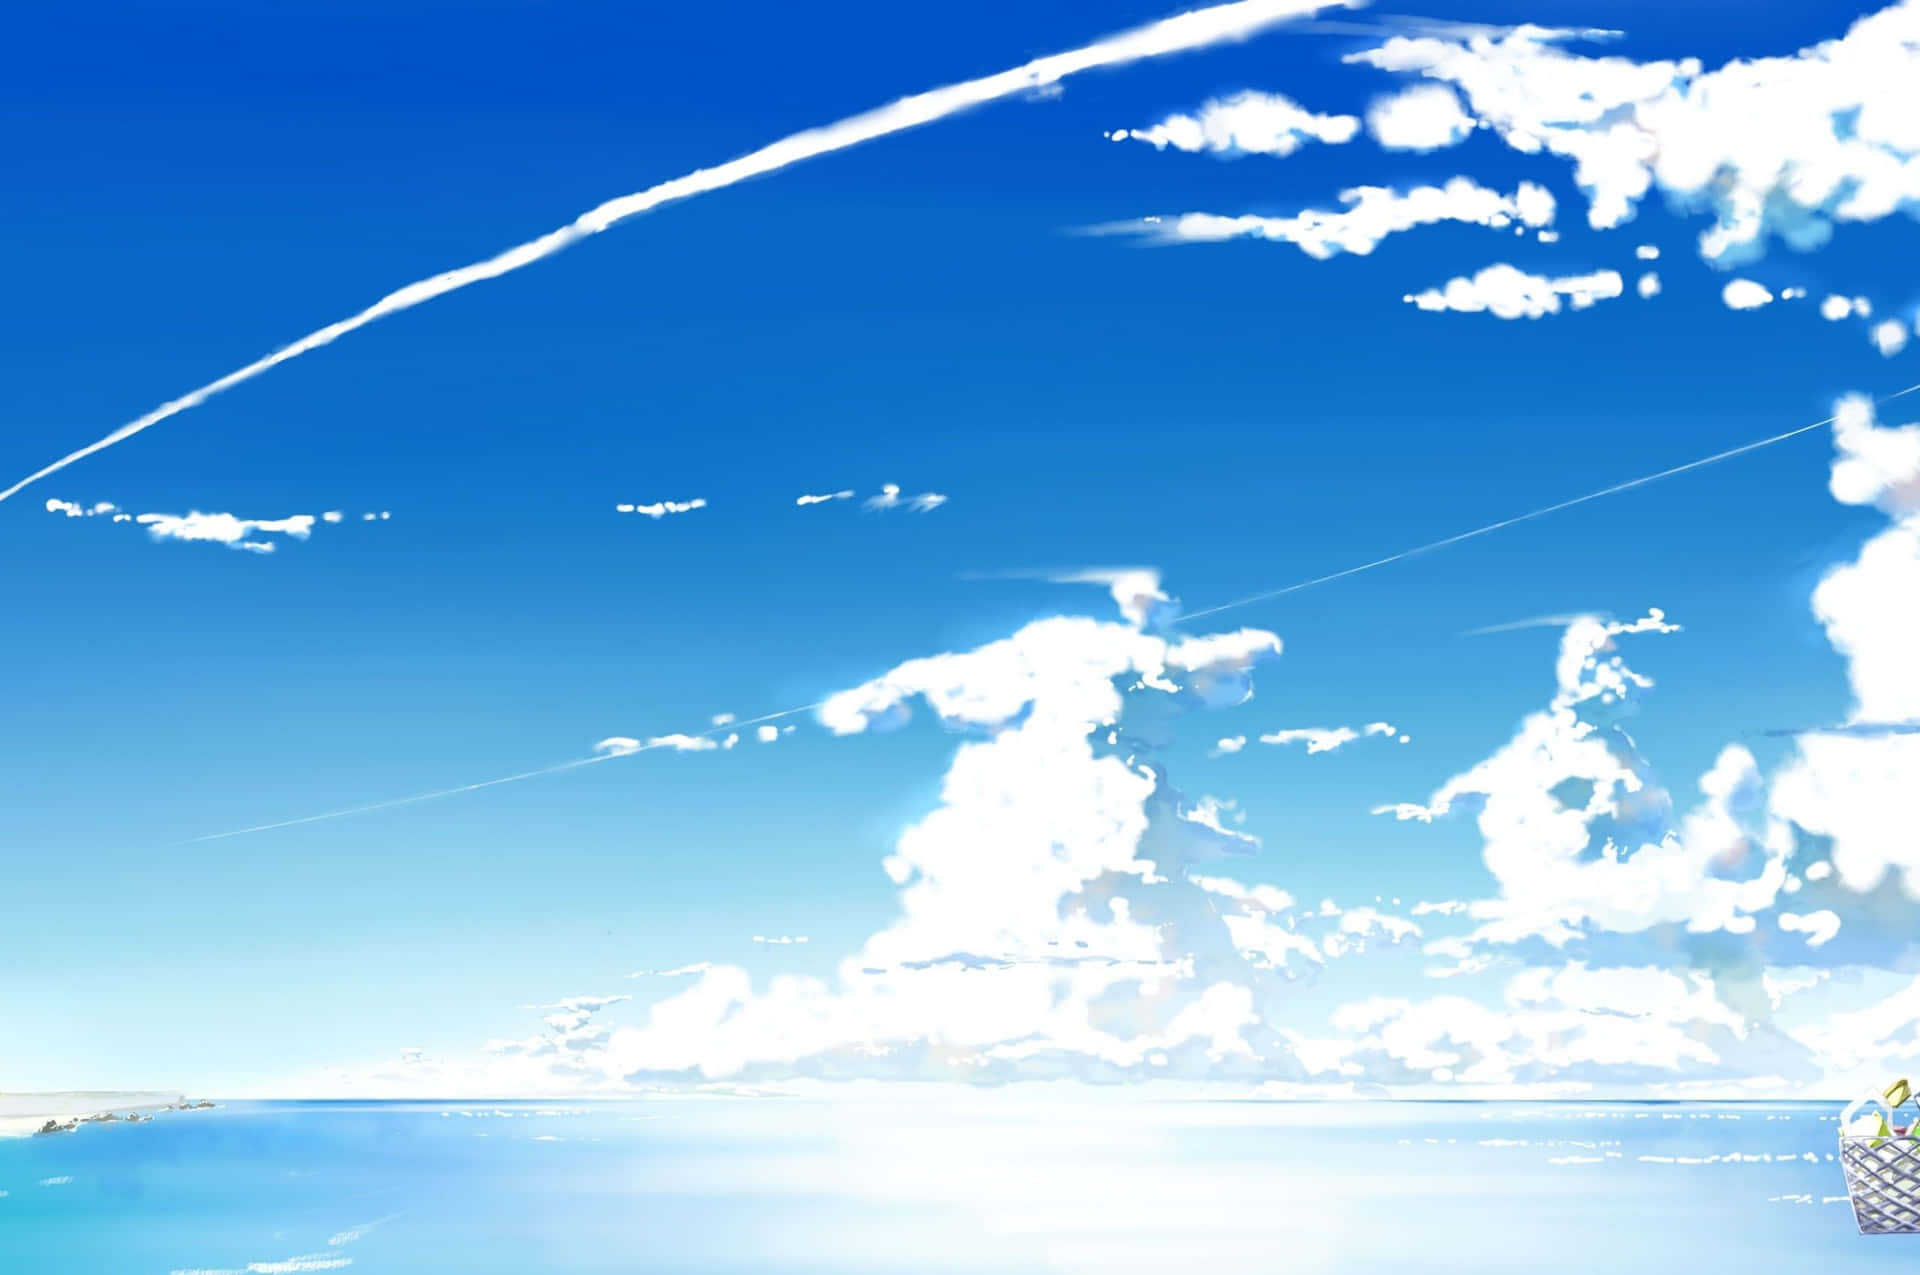 Experience A Surreal Adventure at the Anime Beach Wallpaper